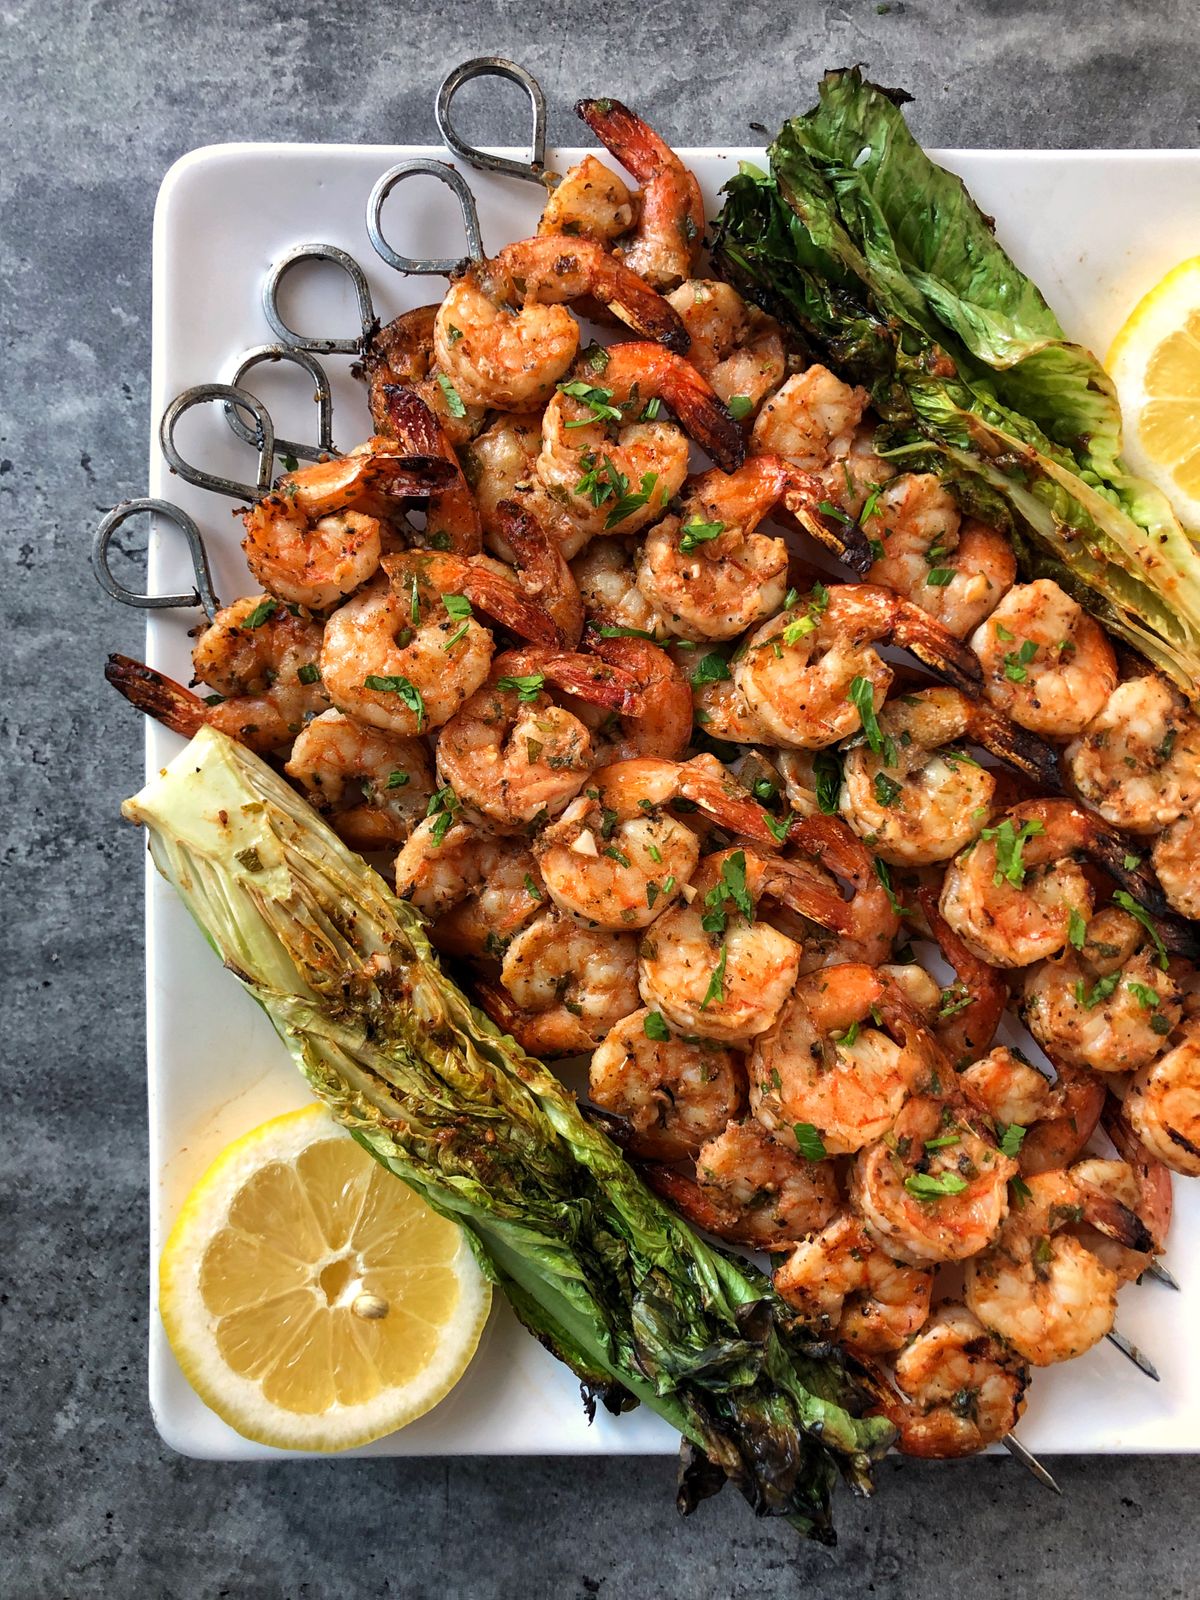 Take advantage of outdoor cooking and dining with these grilled shrimp skewers.  (Audrey Alfaro/For The Spokesman-Review)